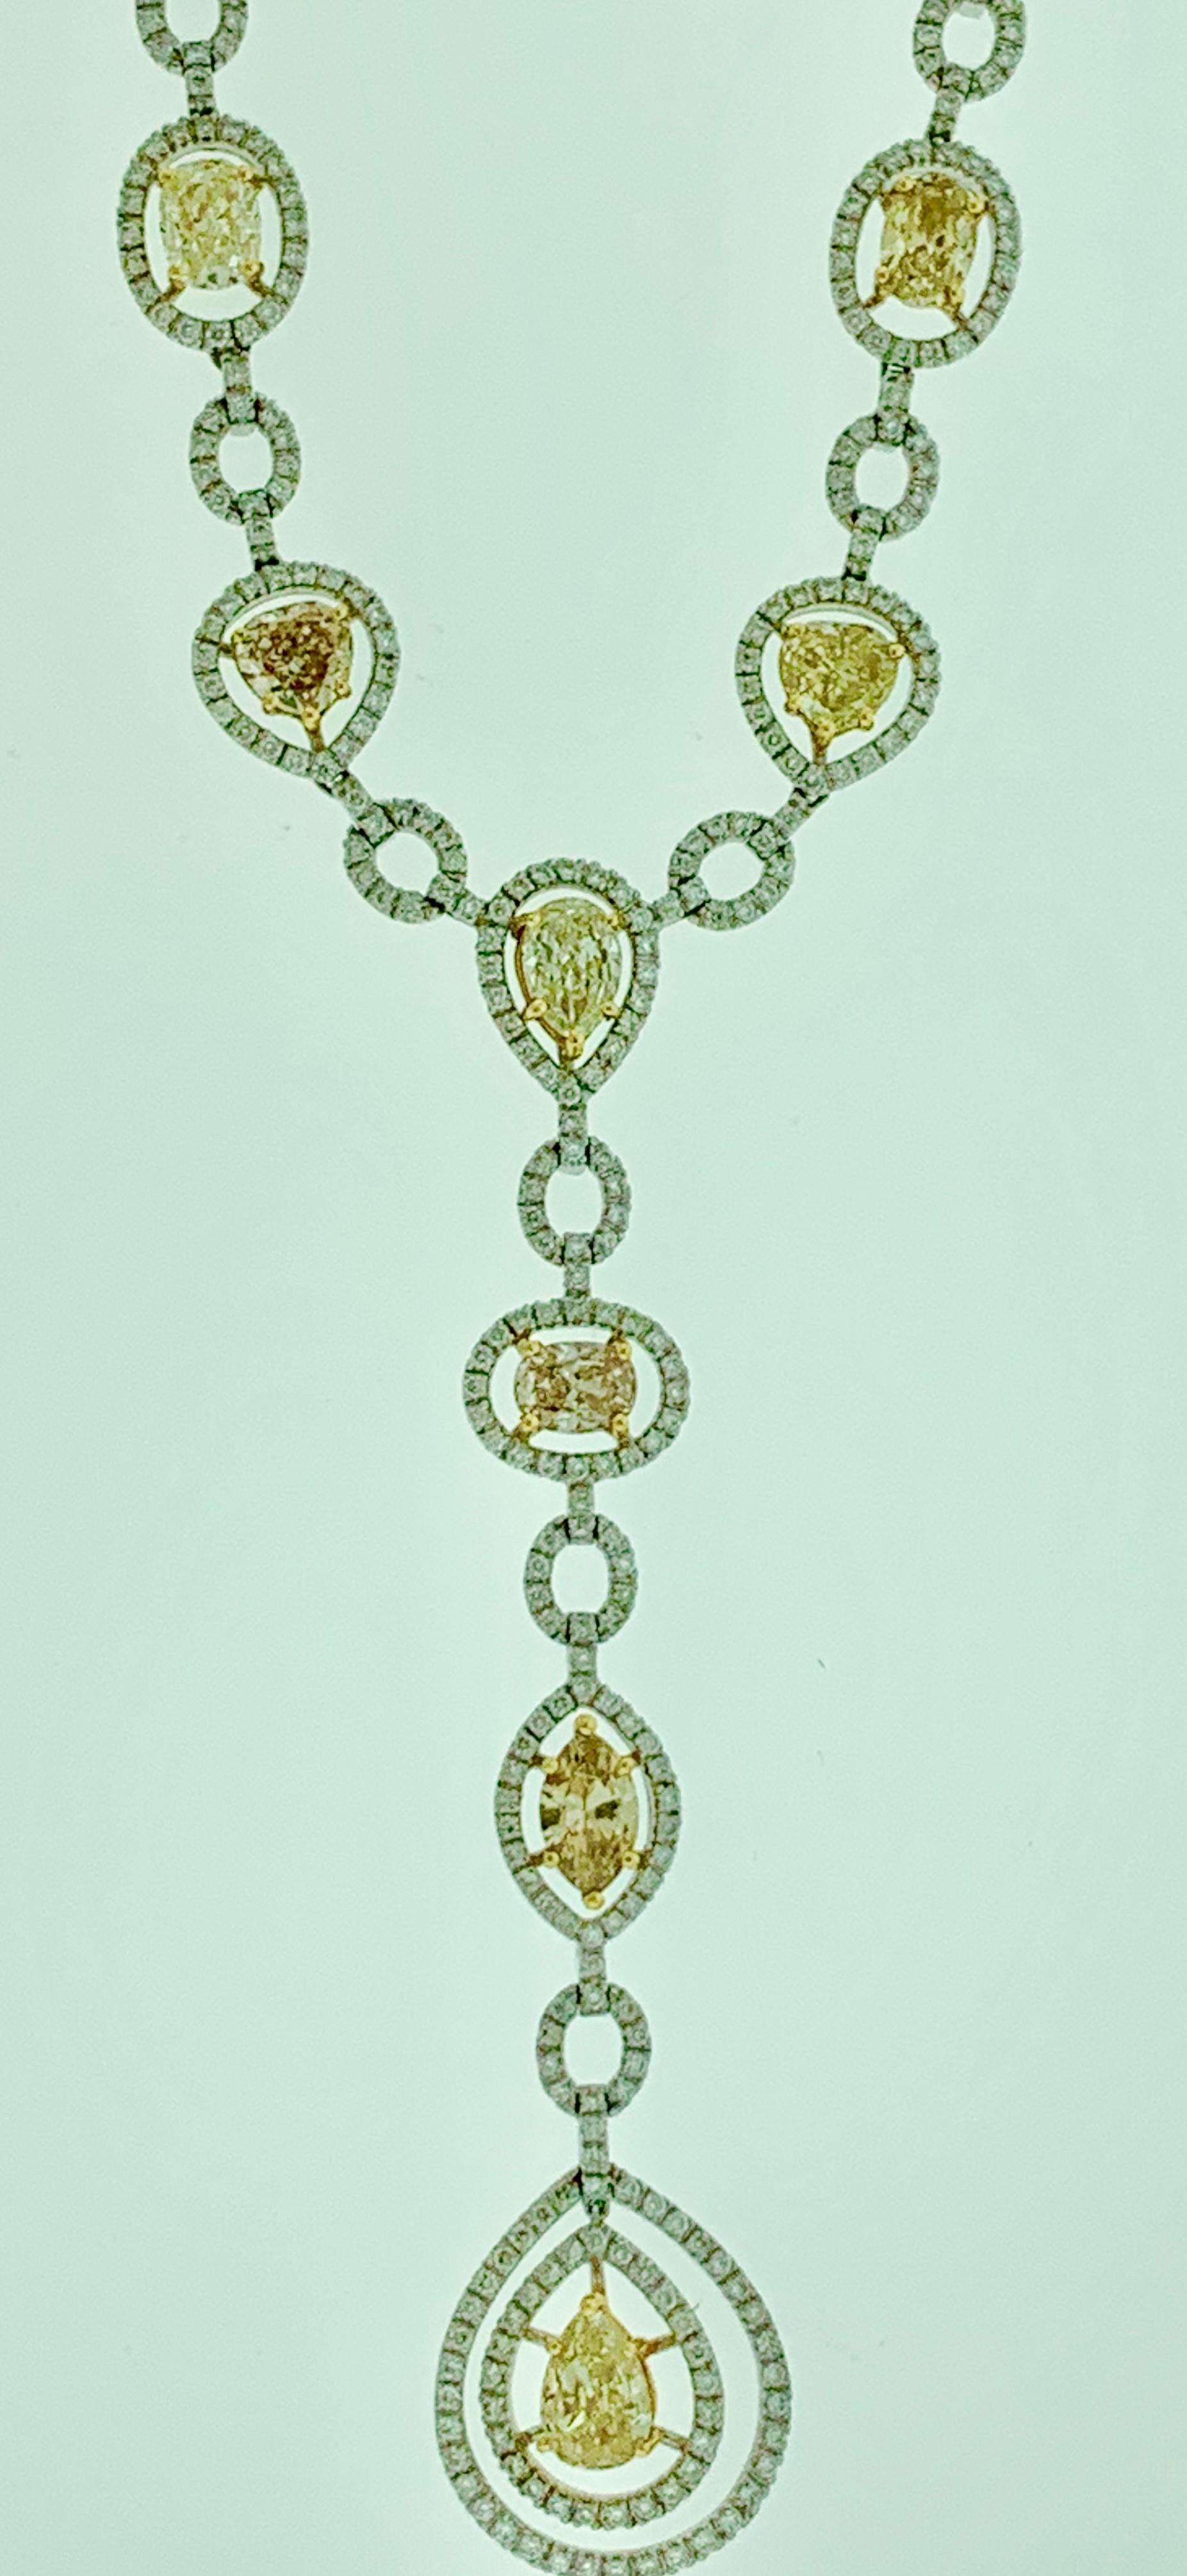 This is one of the premium necklaces in our Bridal collection that is sure to impress. It features 8 solitaire pieces of yellow diamonds that weigh approximately 10 carats, all mounted in 18 karat gold. The yellow diamonds come in different shapes